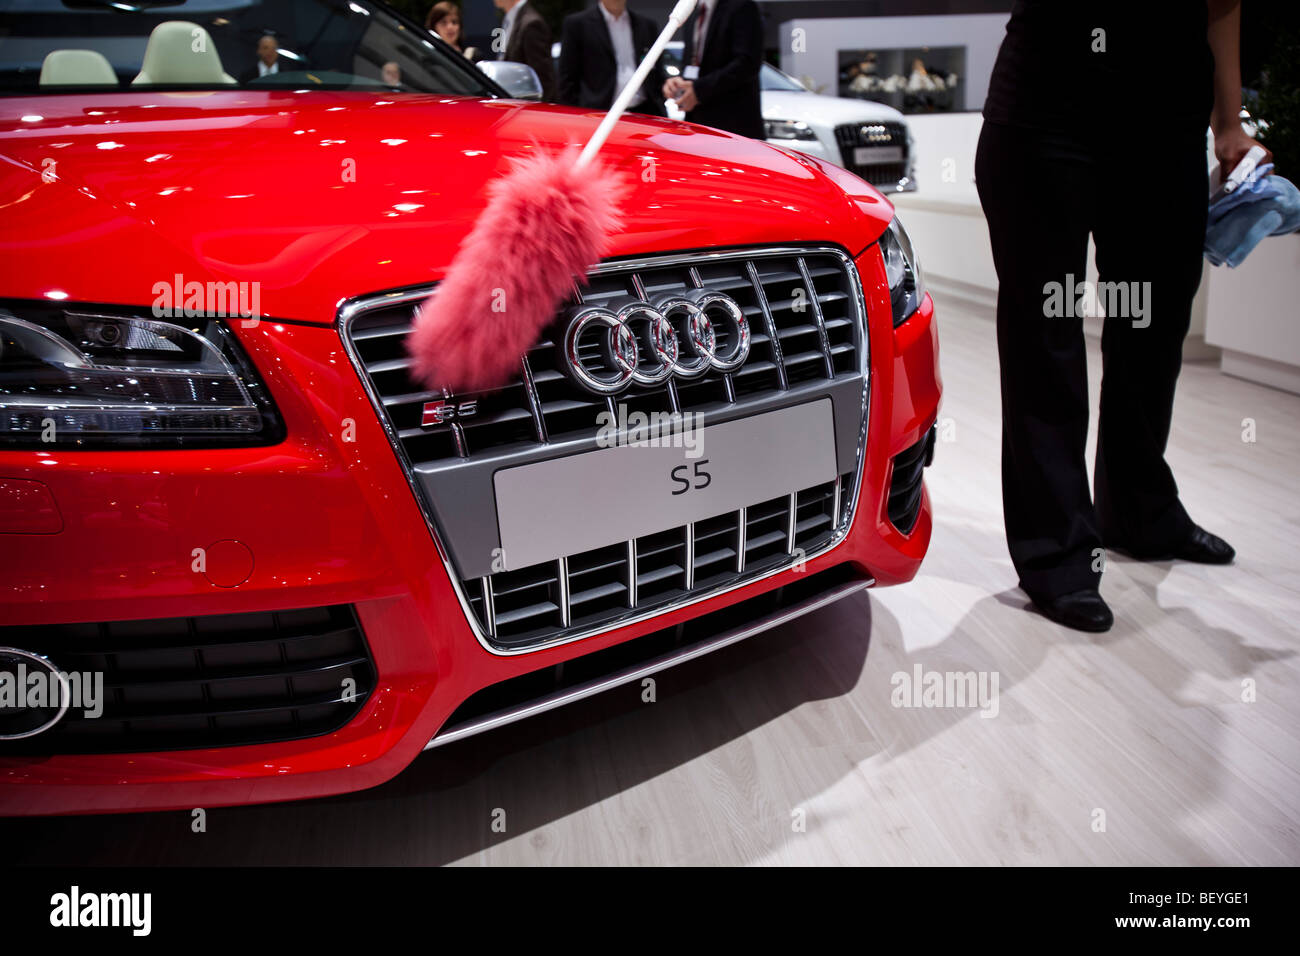 An employee cleans an Audi S5 automobile at Volkswagen AG's annual shareholders' meeting in Hamburg, Germany. Stock Photo